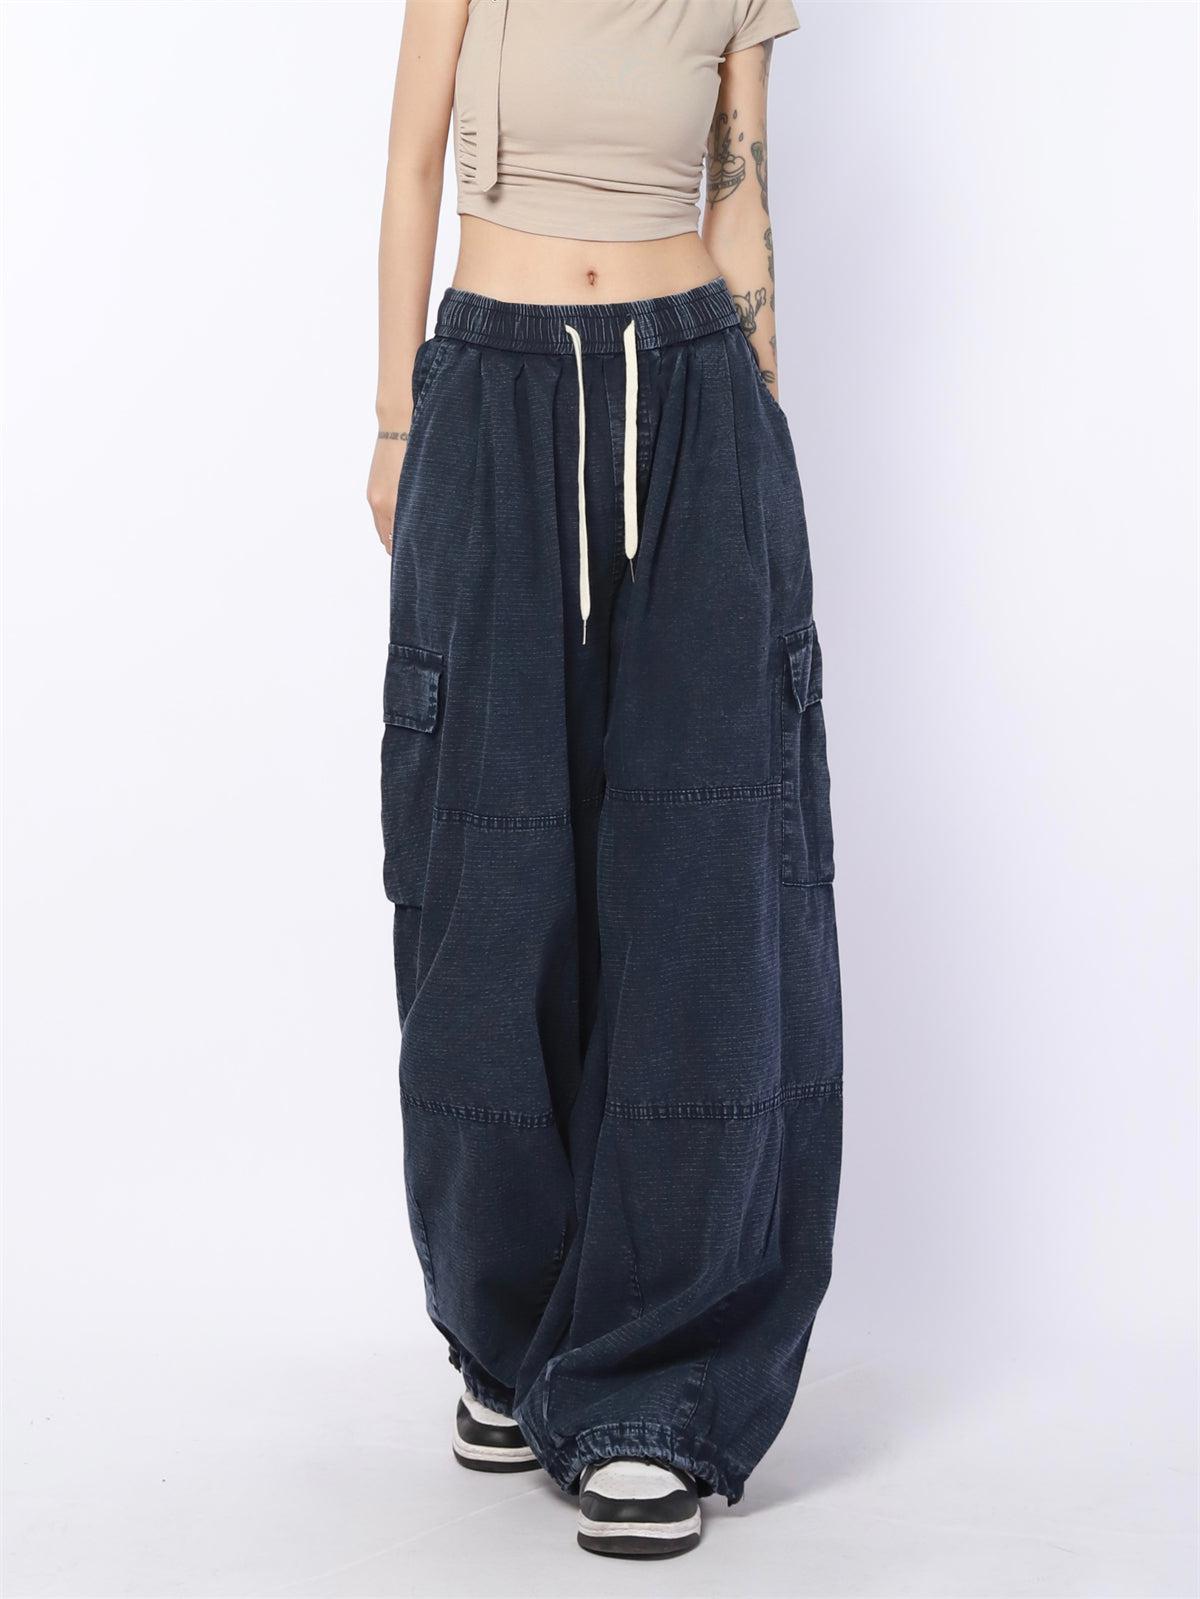 Made Extreme Drawstring Line Textured Wide Cargo Pants Korean Street Fashion Pants By Made Extreme Shop Online at OH Vault